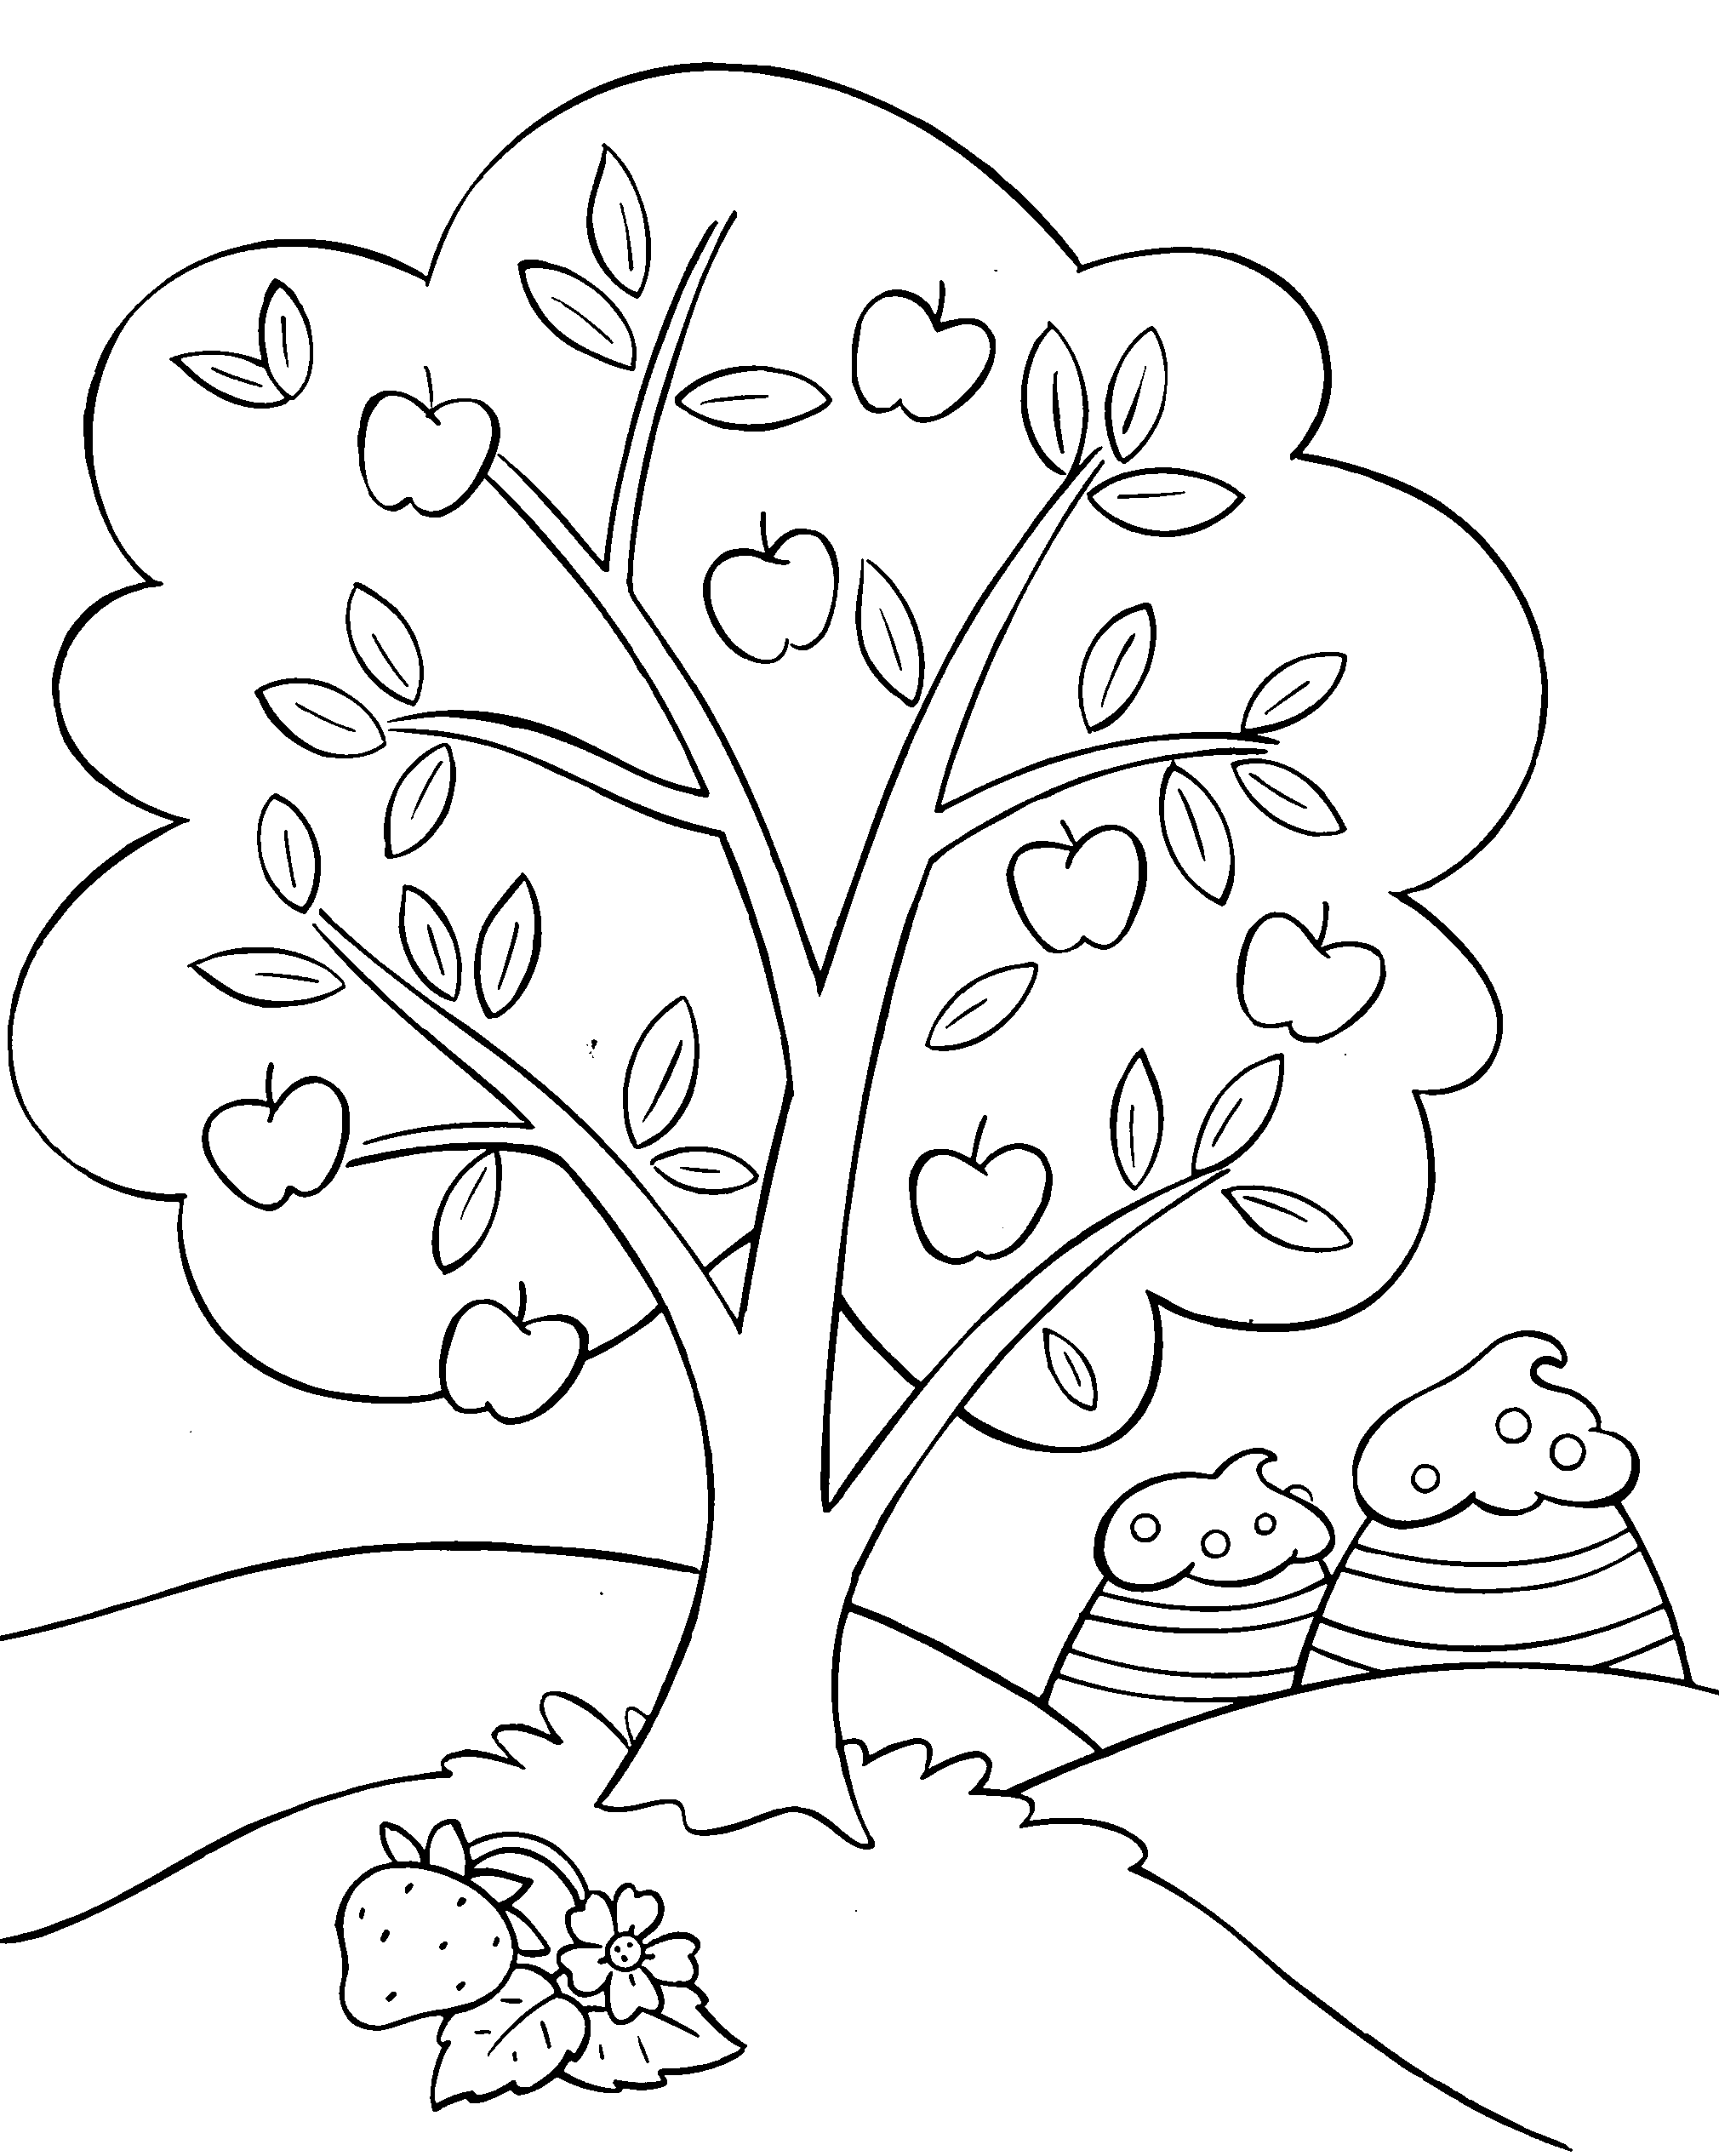 Online Coloring in Pages 4